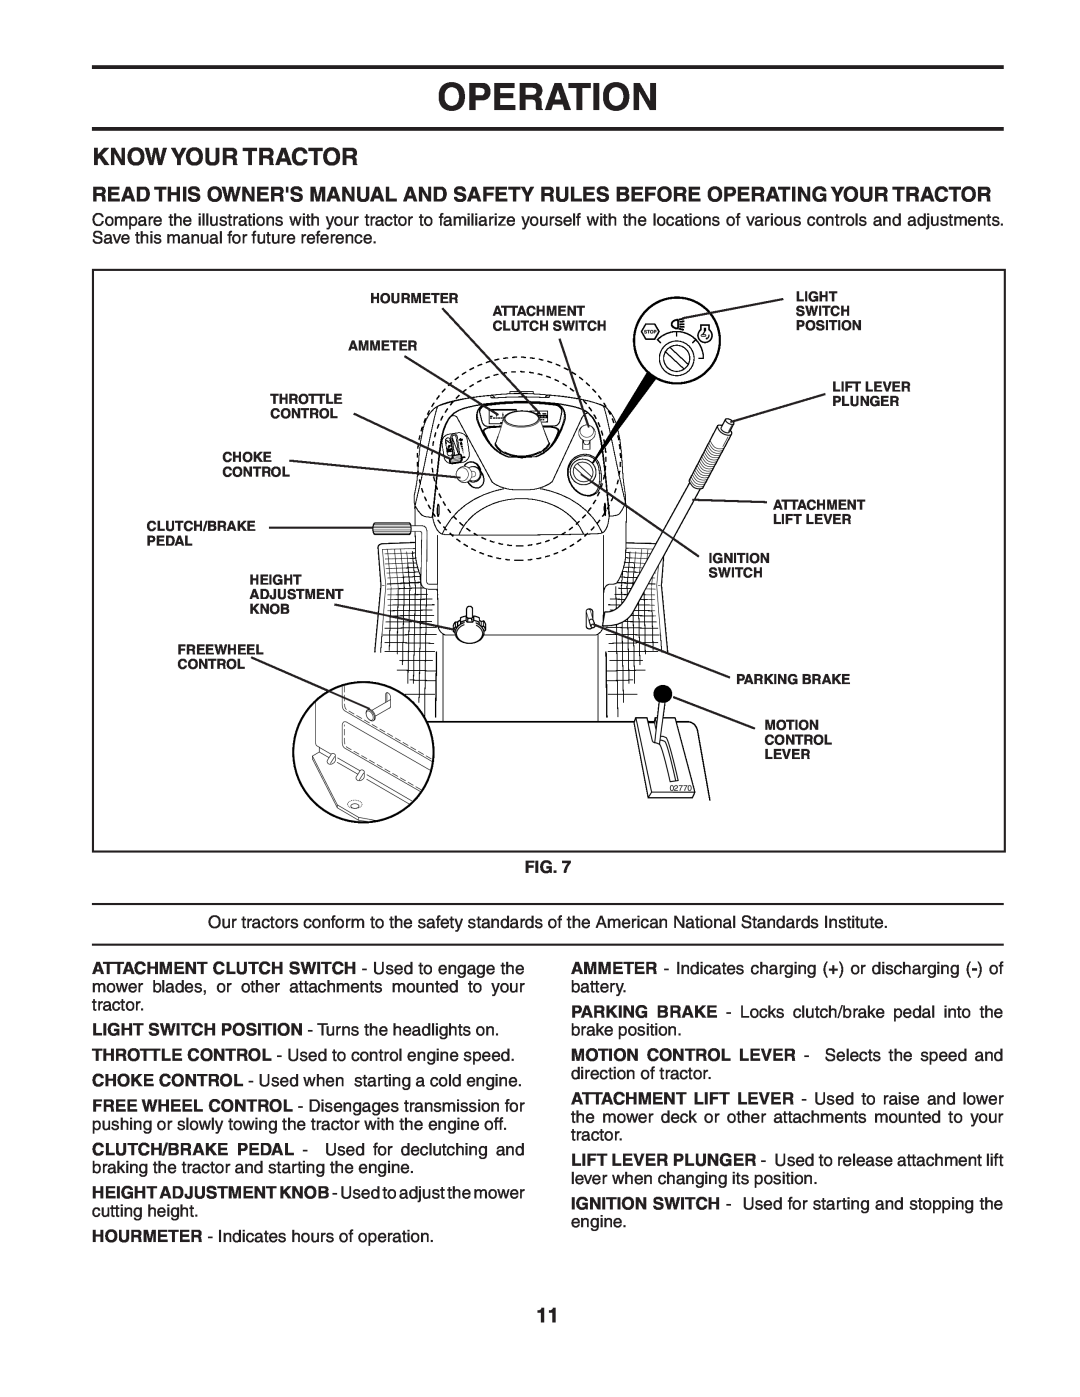 Husqvarna YTH2248 owner manual Know Your Tractor, Operation, LIGHT SWITCH POSITION - Turns the headlights on 